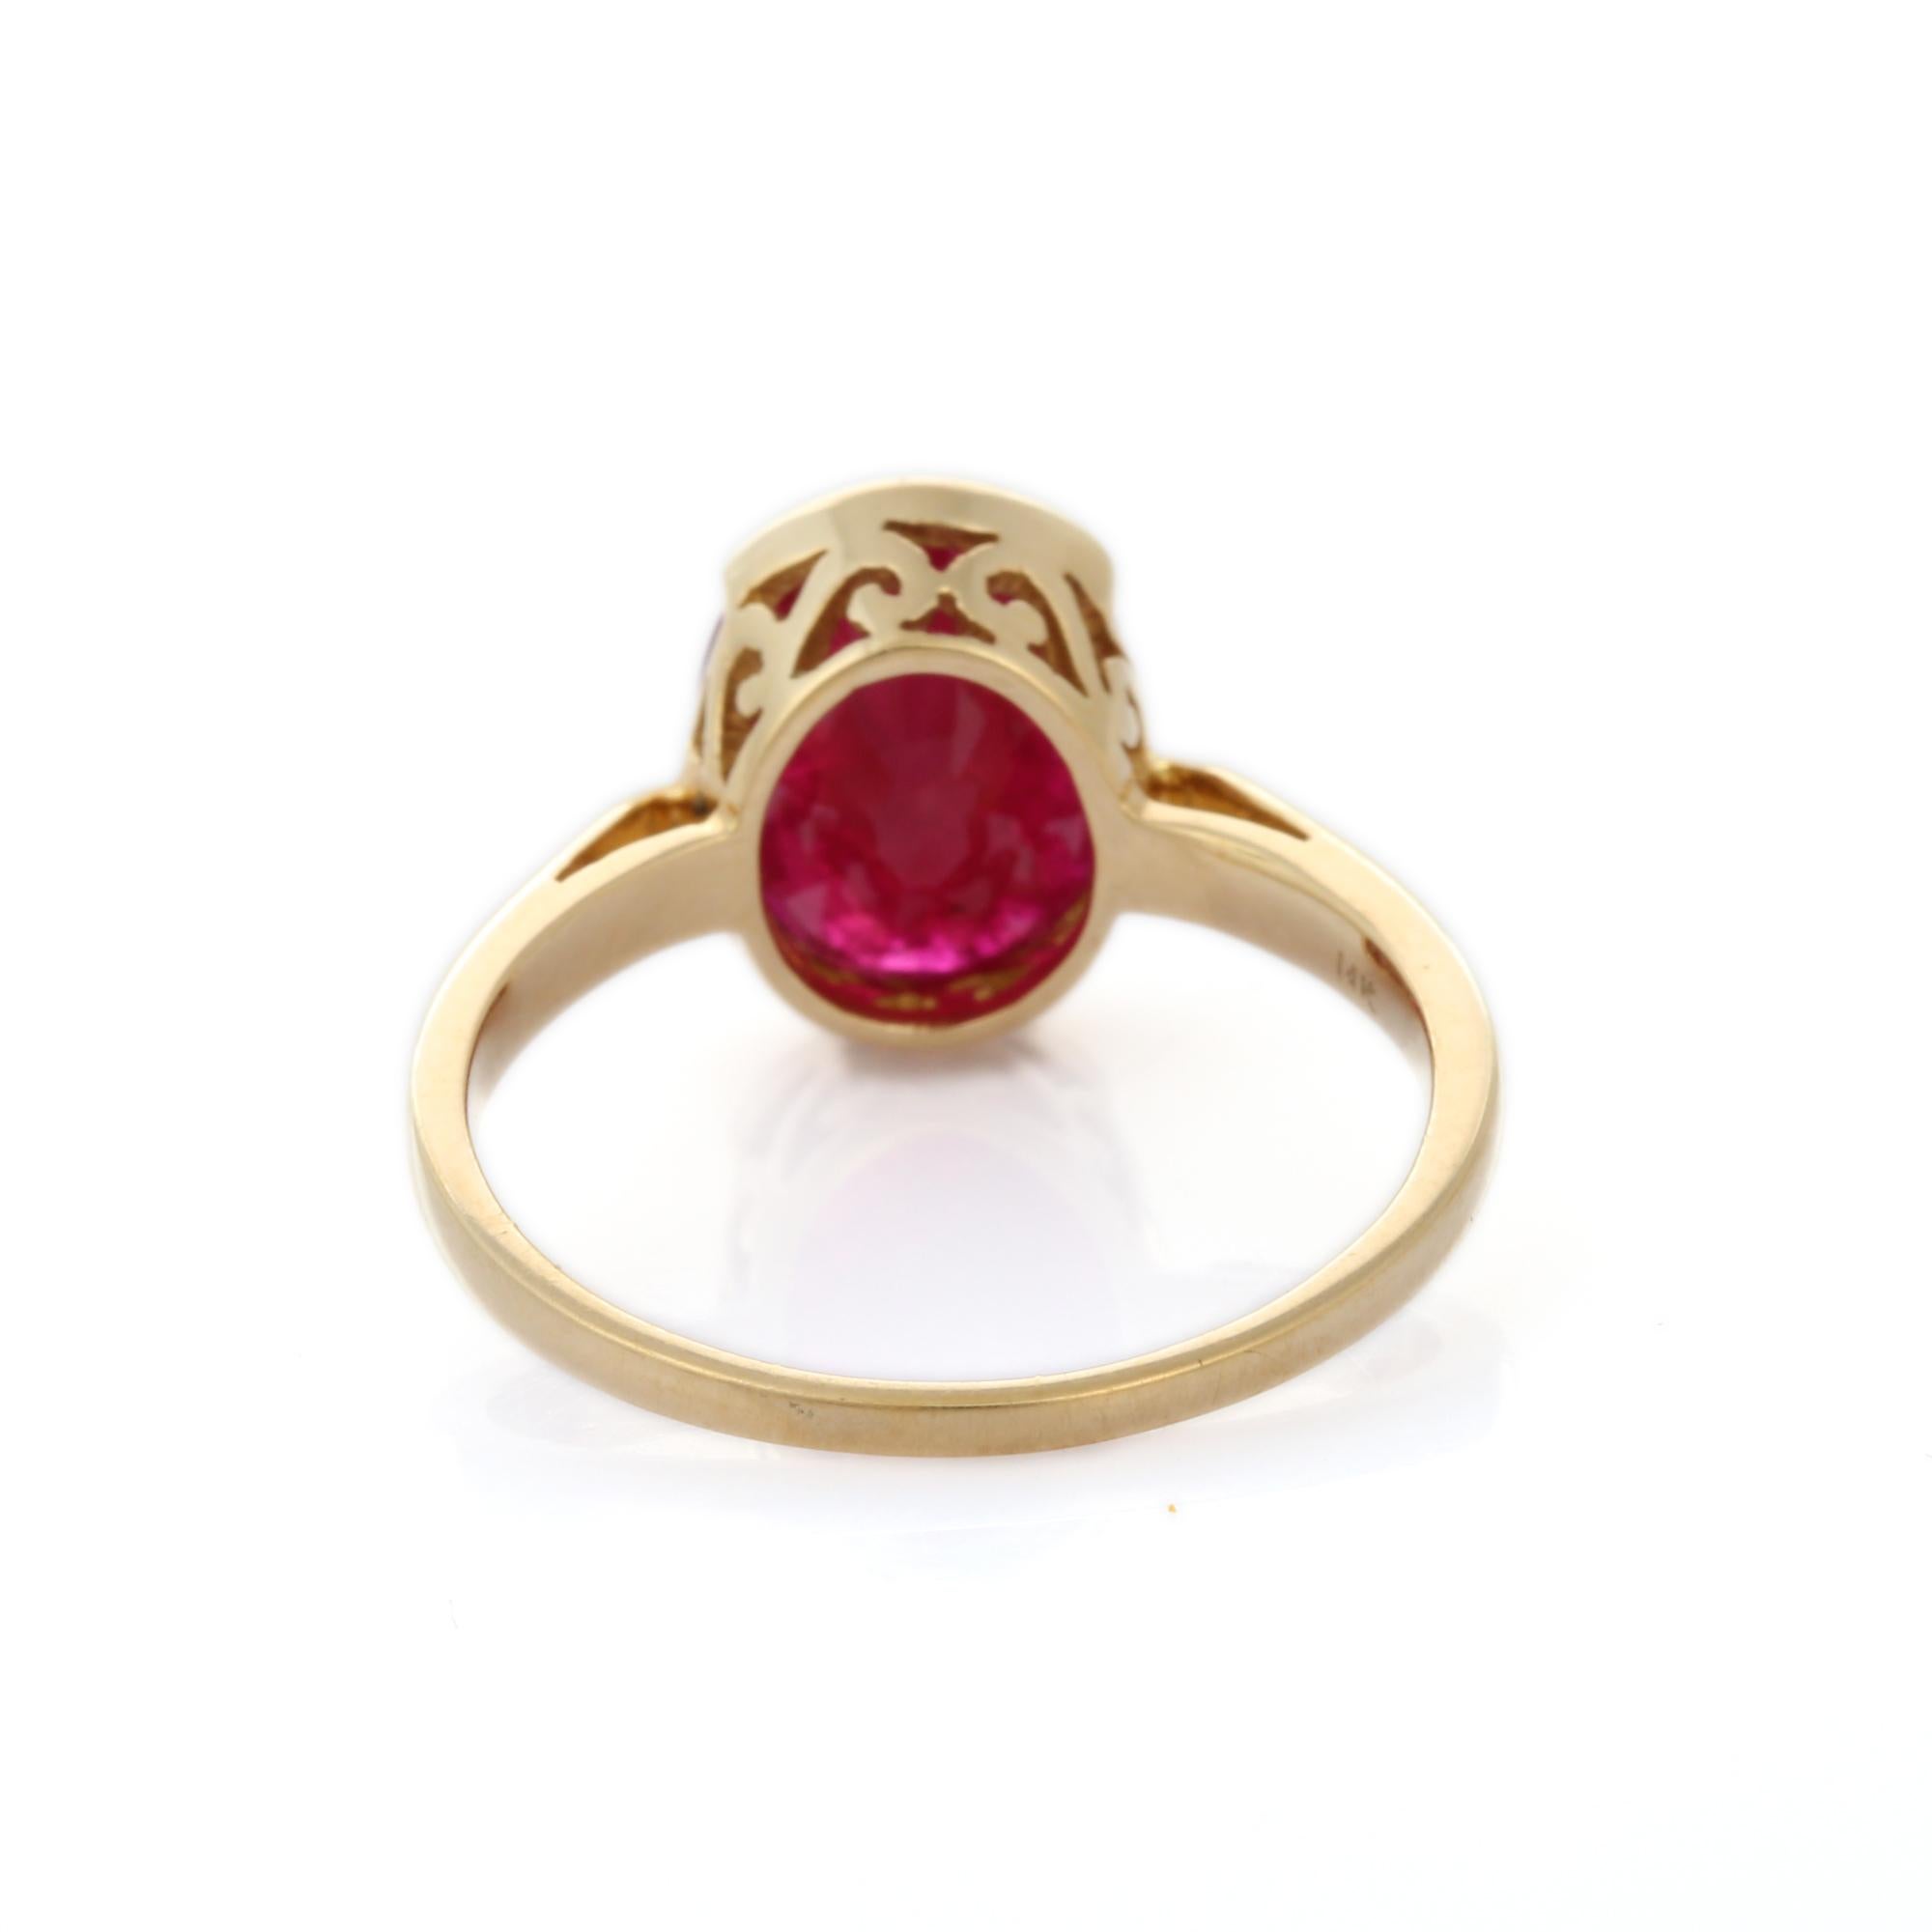 For Sale:  Contemporary Style 3.59 Carat Ruby Oval Cut Cocktail Ring in 14K Yellow Gold   7